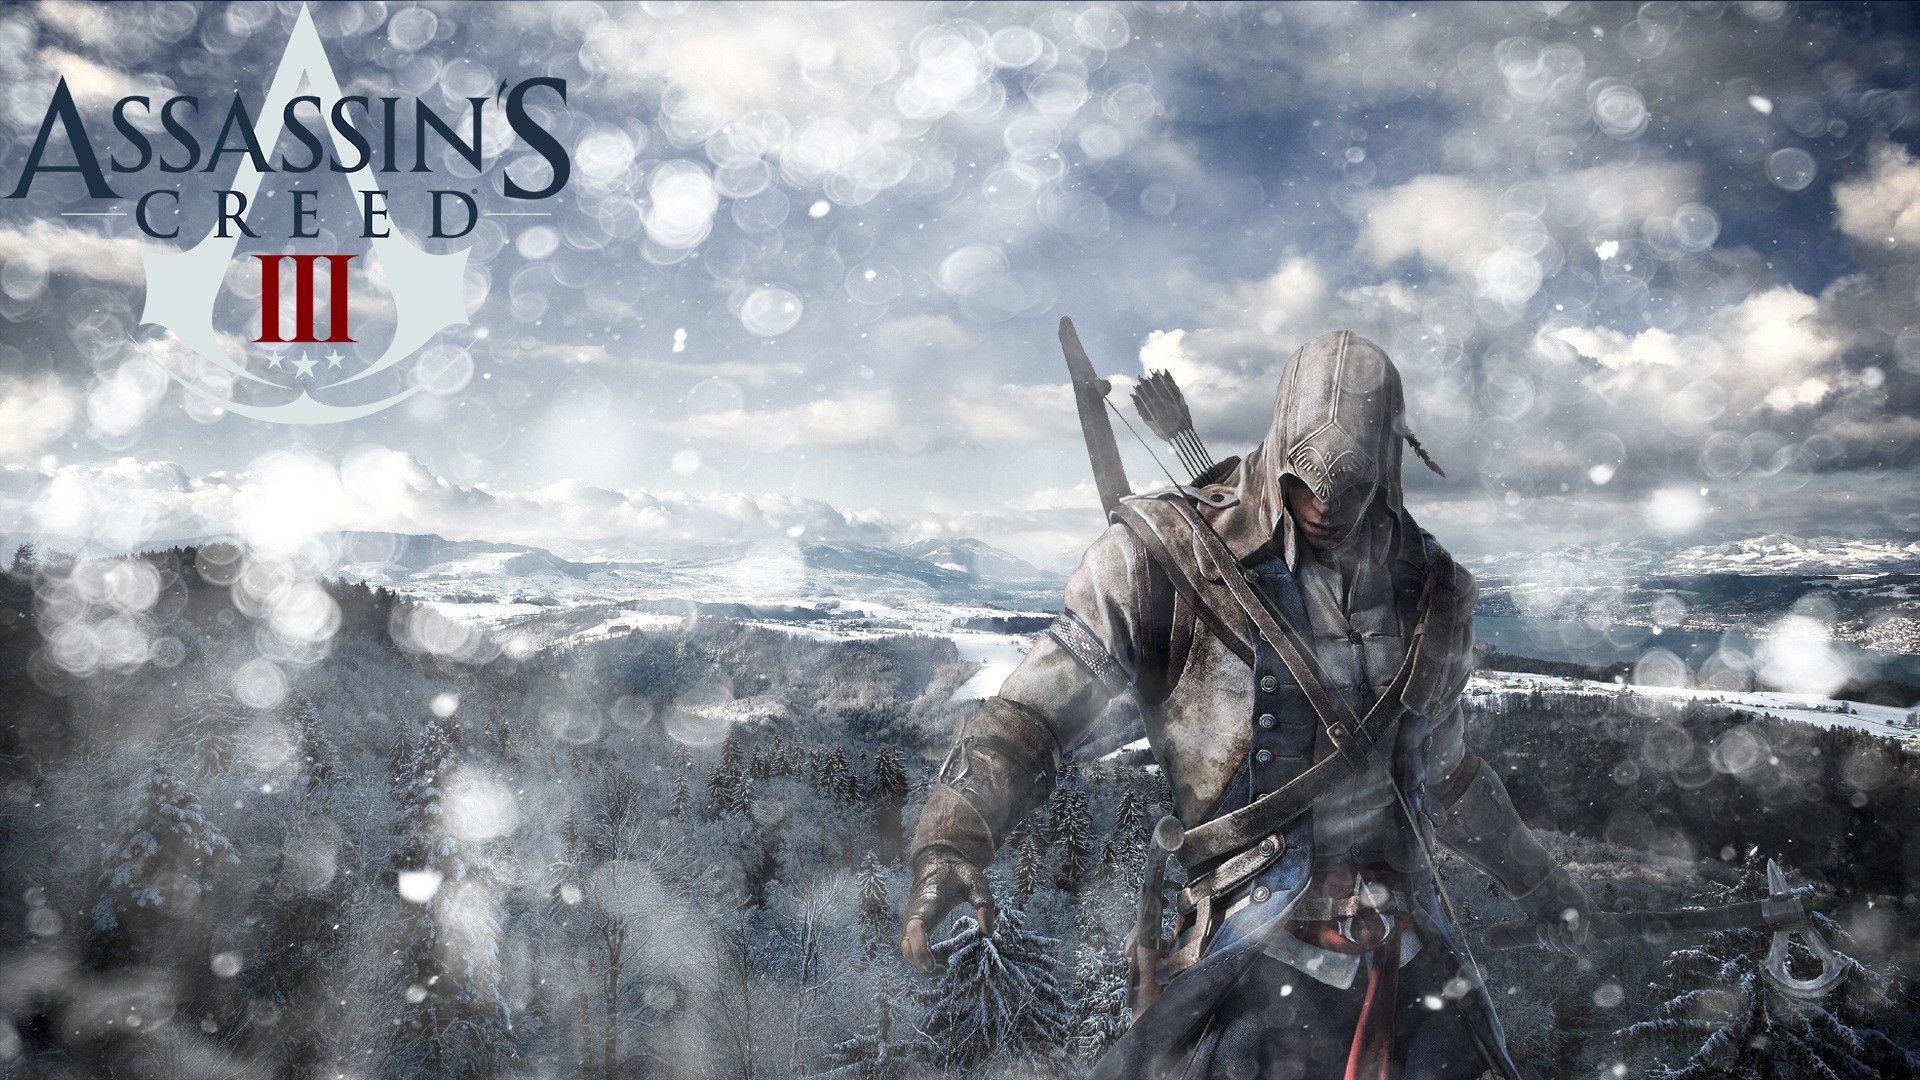 Wallpapers For > Assassins Creed 3 Wallpapers Hd 1920x1080